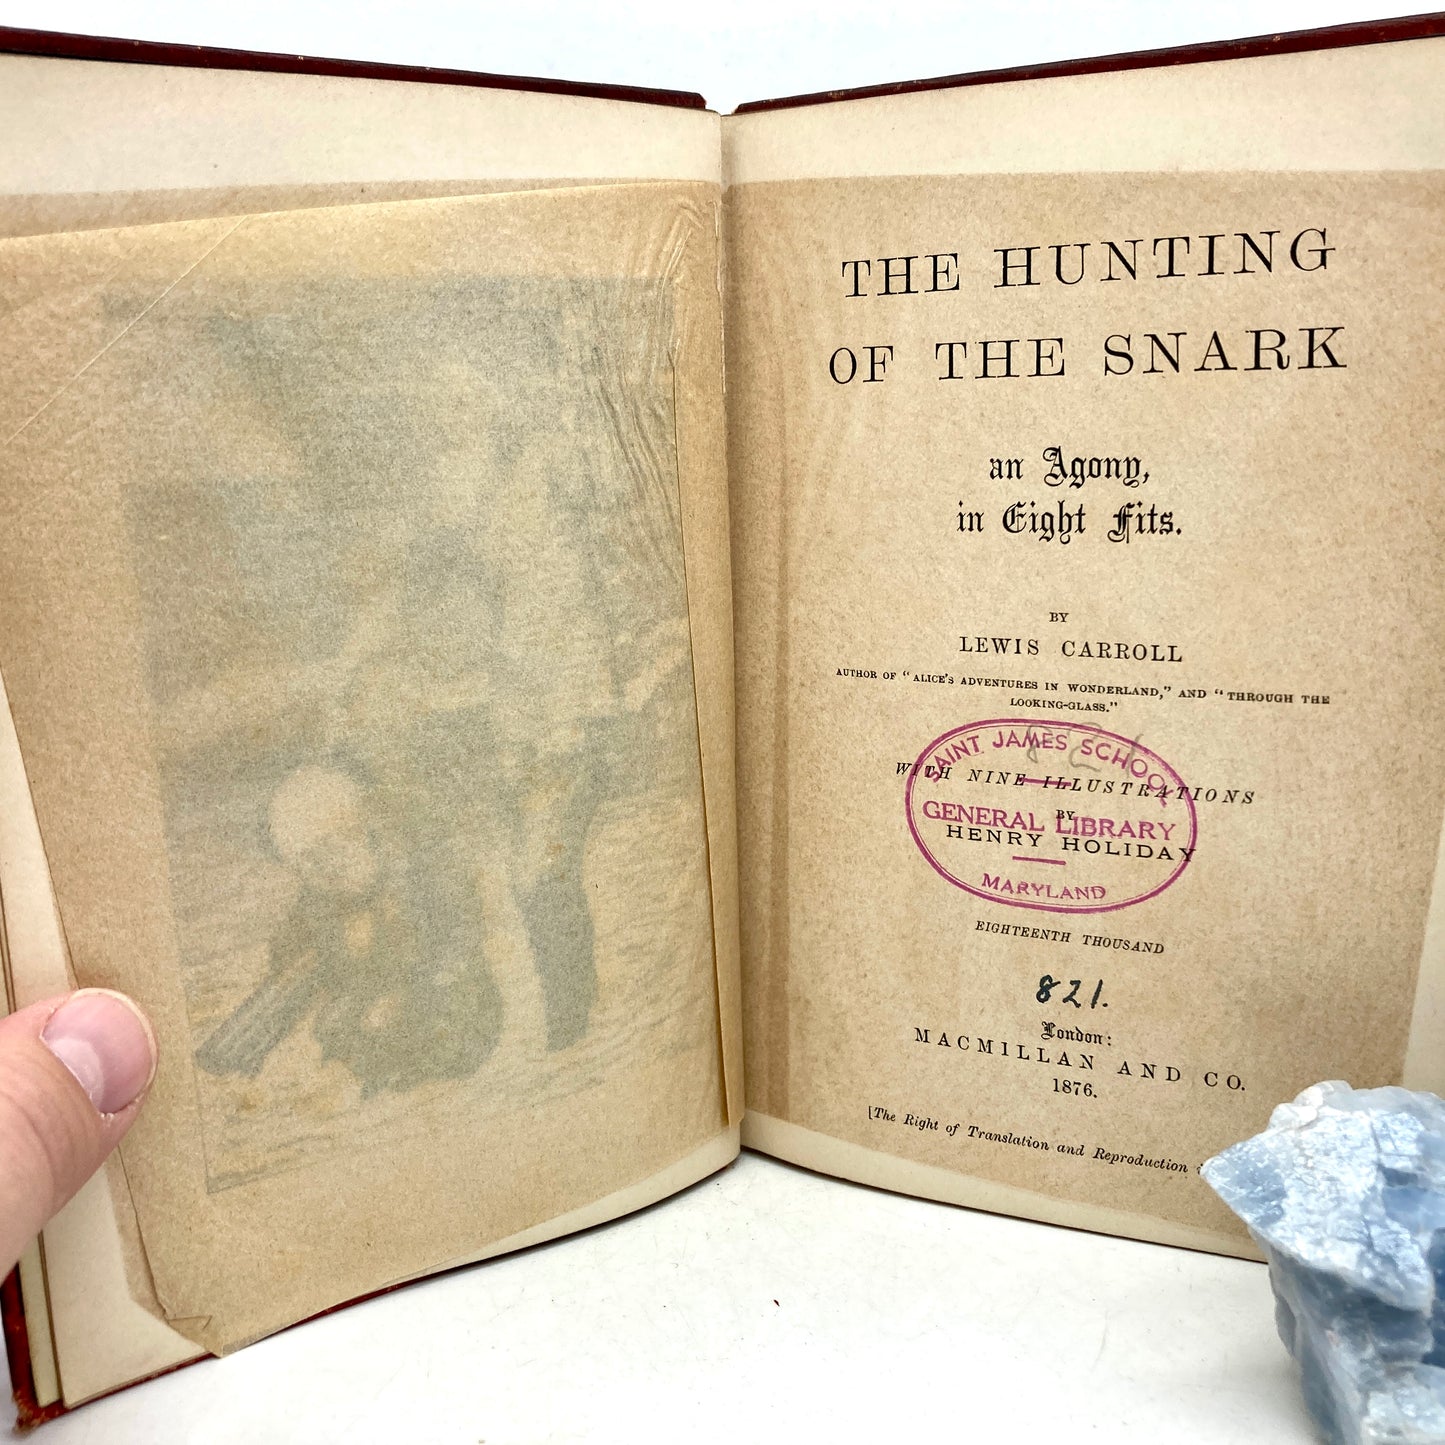 CARROLL, Lewis "The Hunting of the Snark" [Macmillan, 1876] - Buzz Bookstore